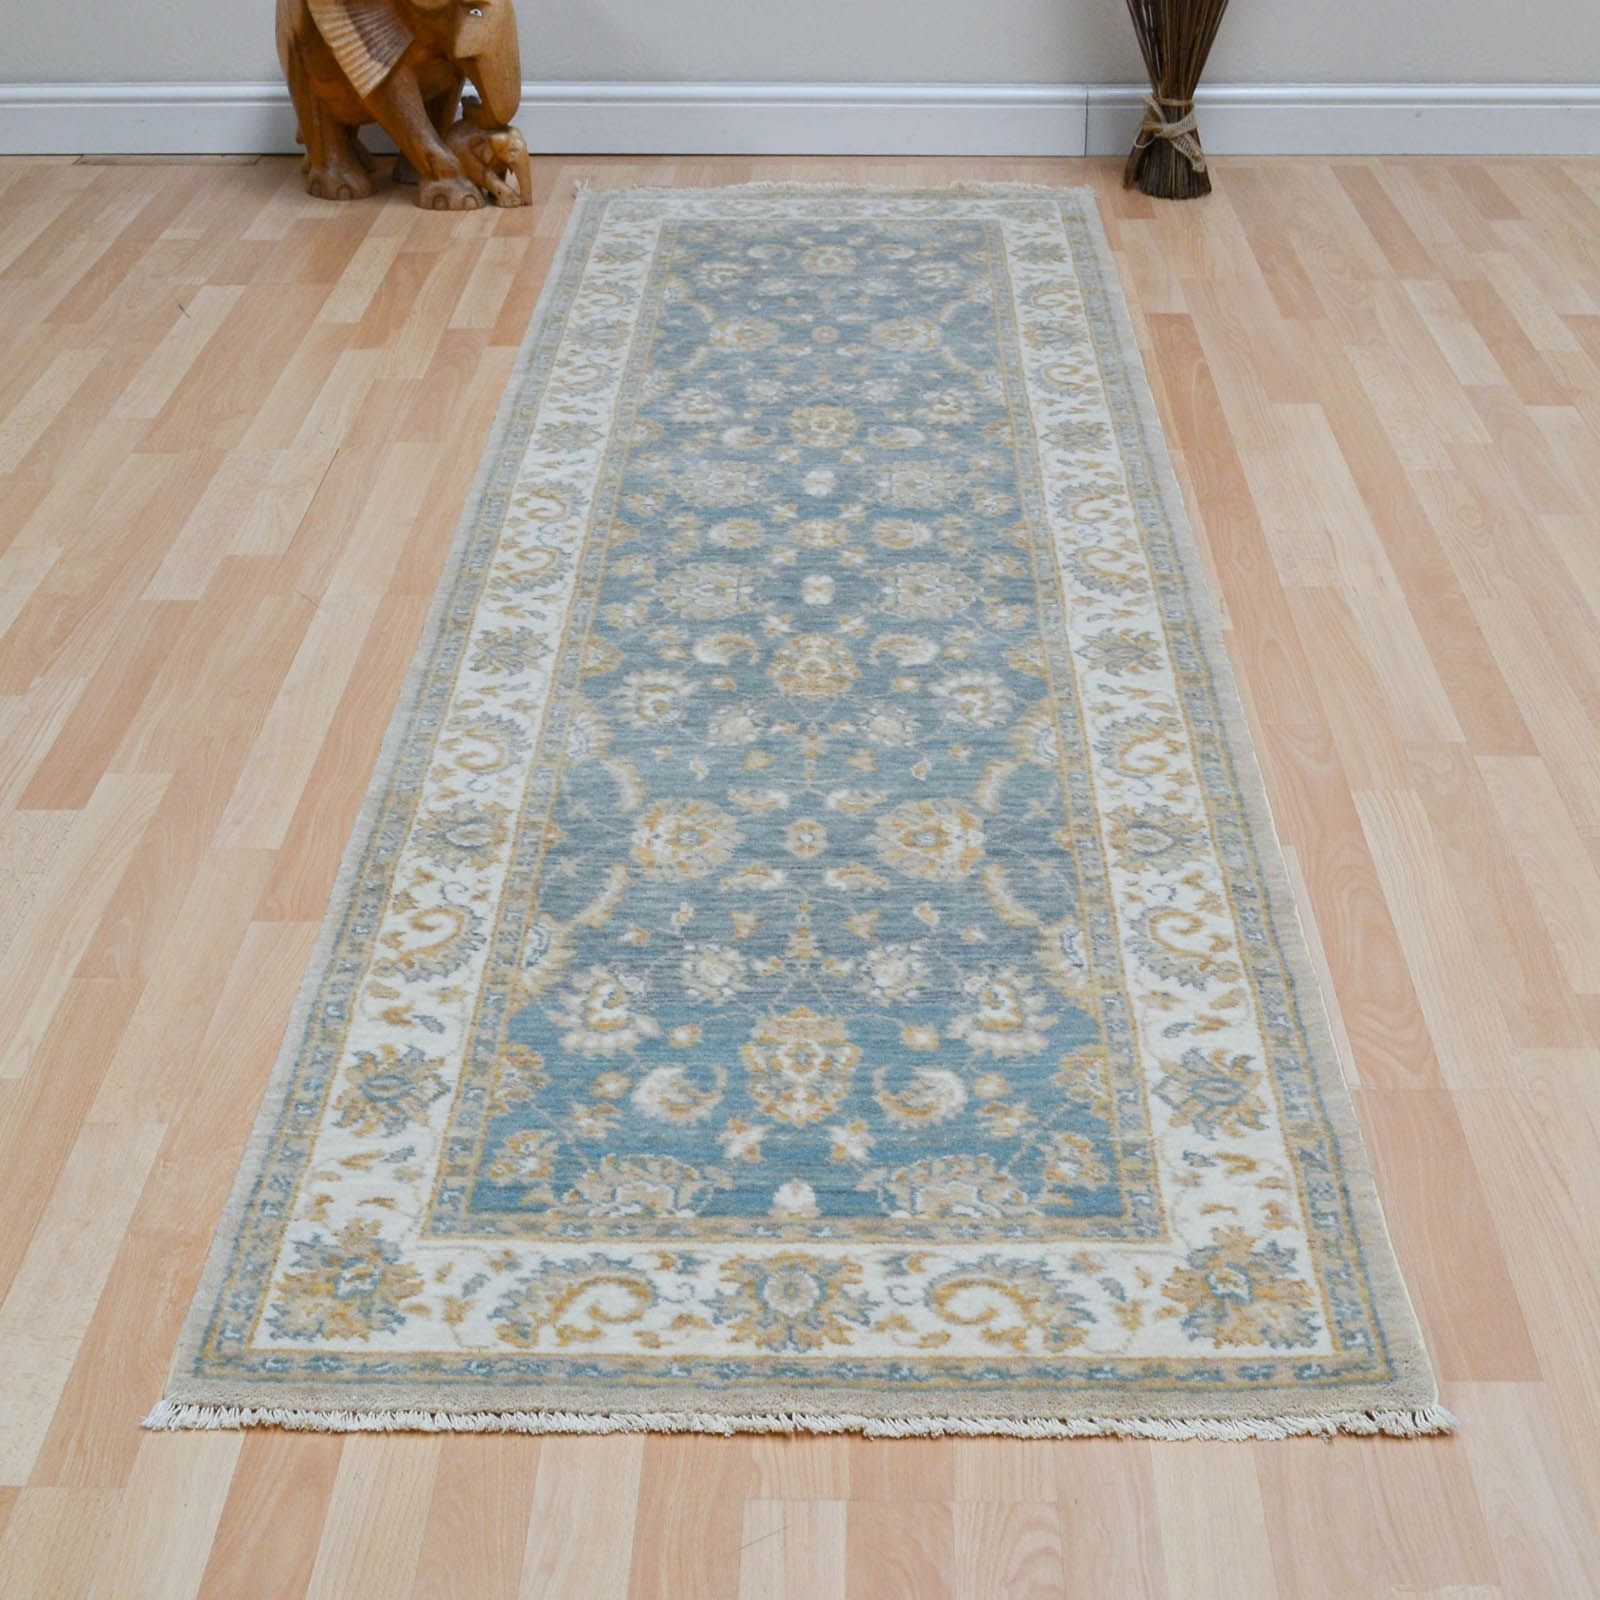 Ripple Blue Kids Floor Rugs Free Shipping Australia Wide Also Pertaining To Blue Rug Runners For Hallways (View 2 of 20)